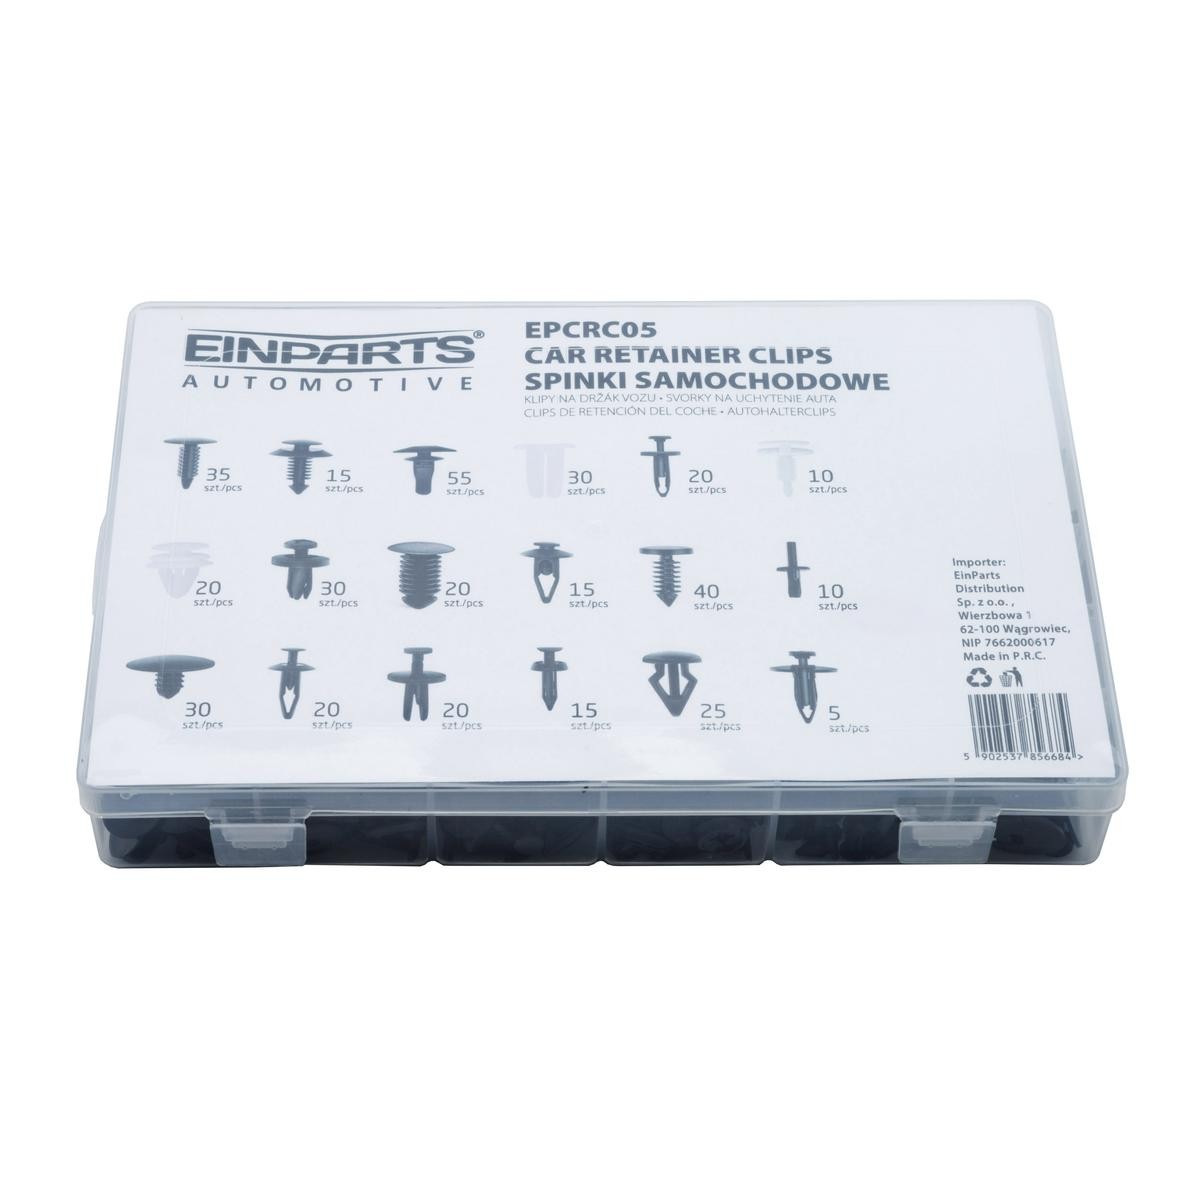 Original EPCRC05 EINPARTS Holding Clip Set, body experience and price